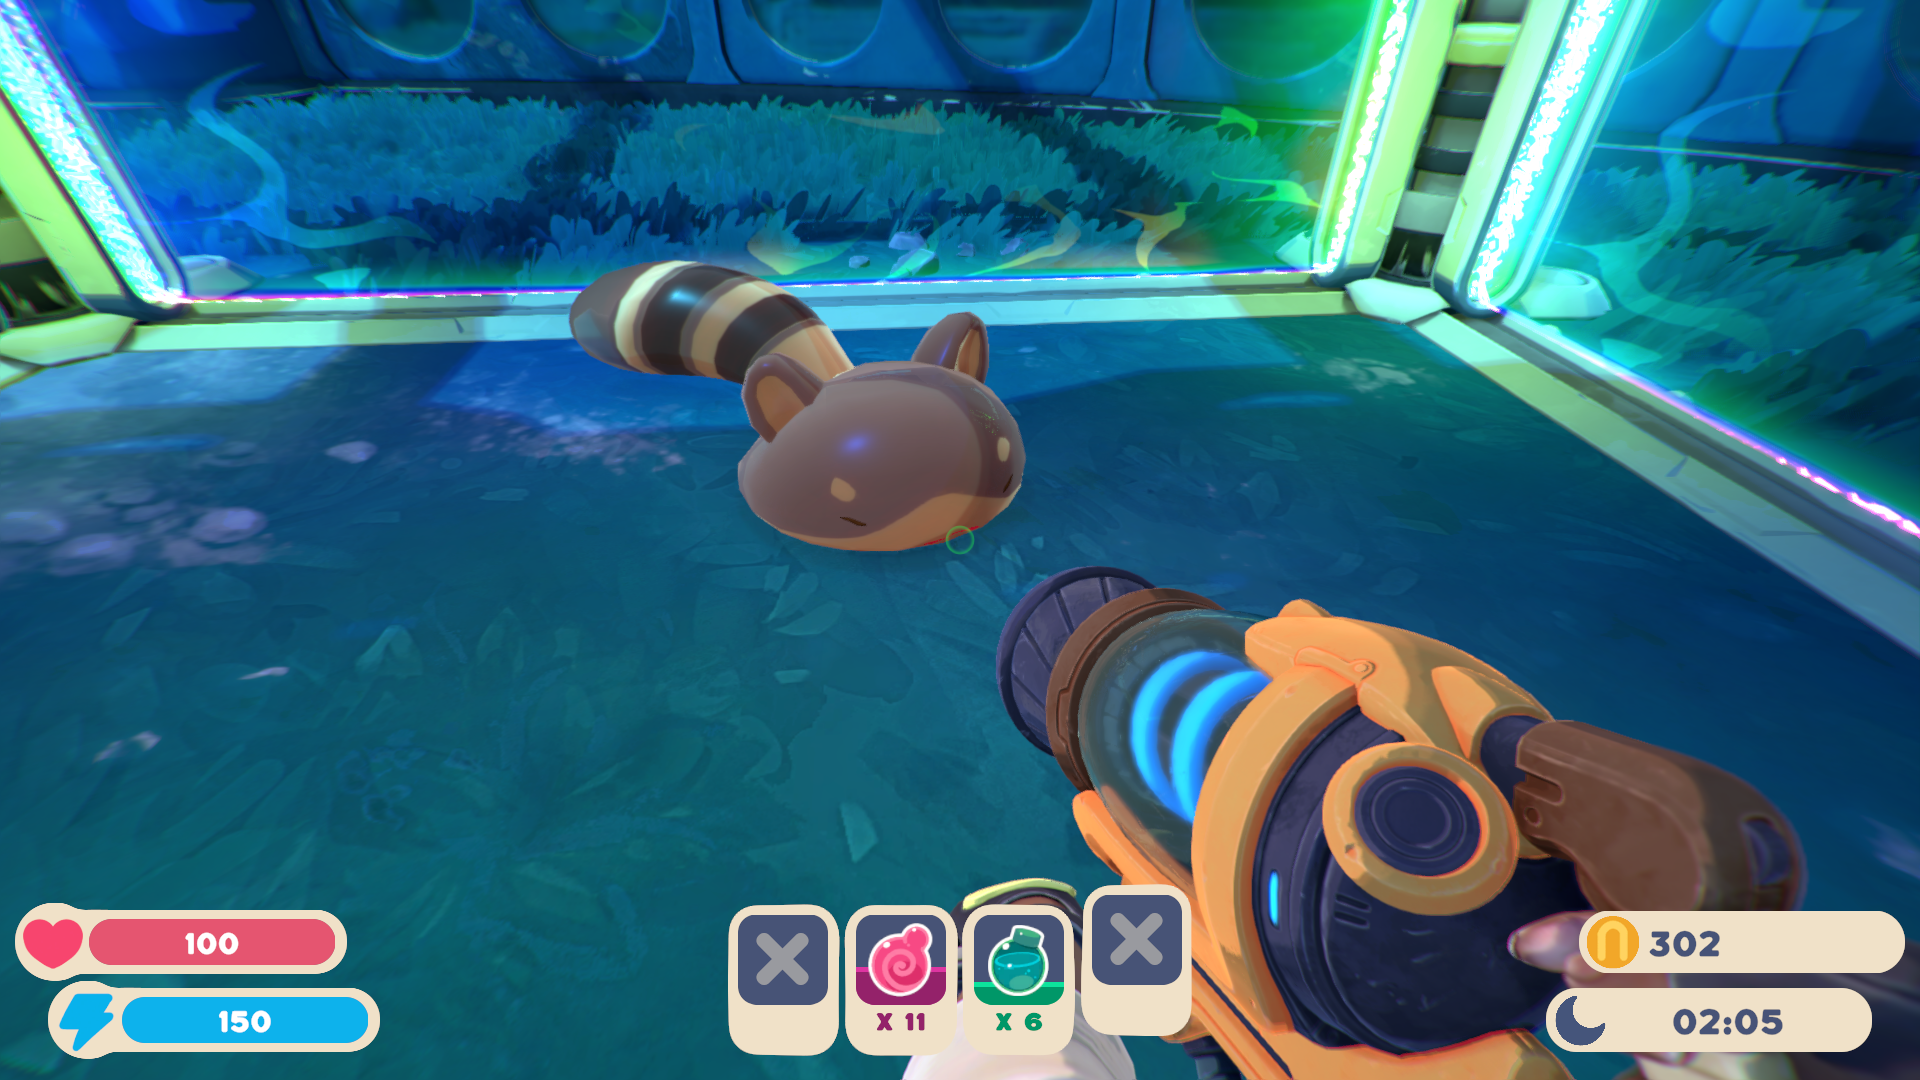 Slime Rancher 2: How To Make The Most Newbucks